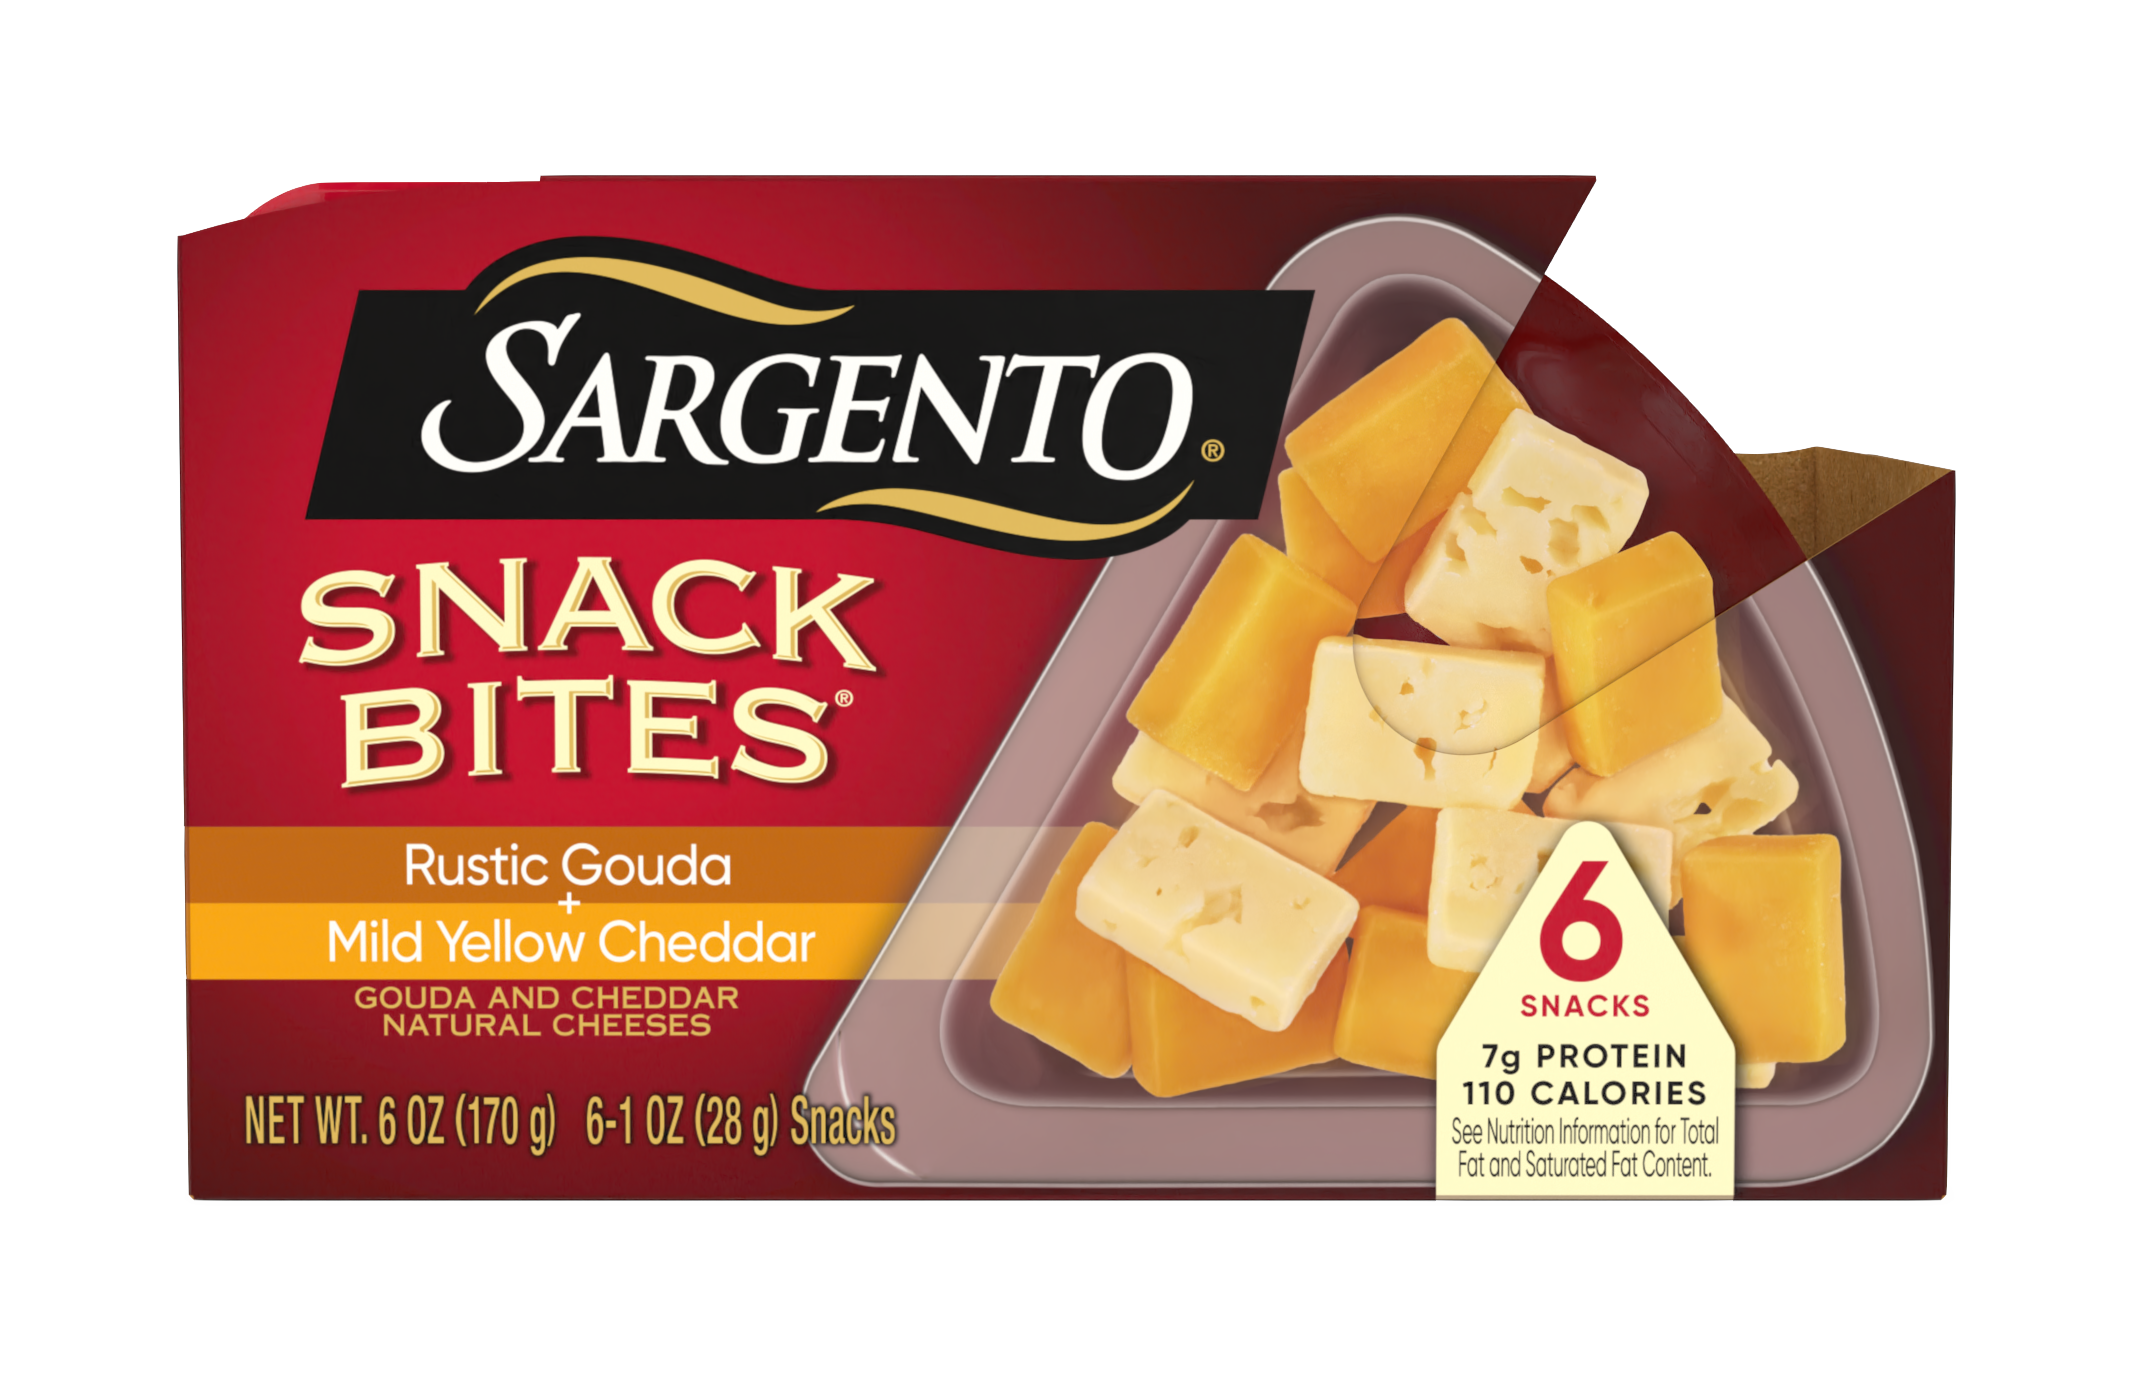 Sargento® Snack Bites® Rustic Gouda + Mild Yellow Cheddar Natural Cheeses